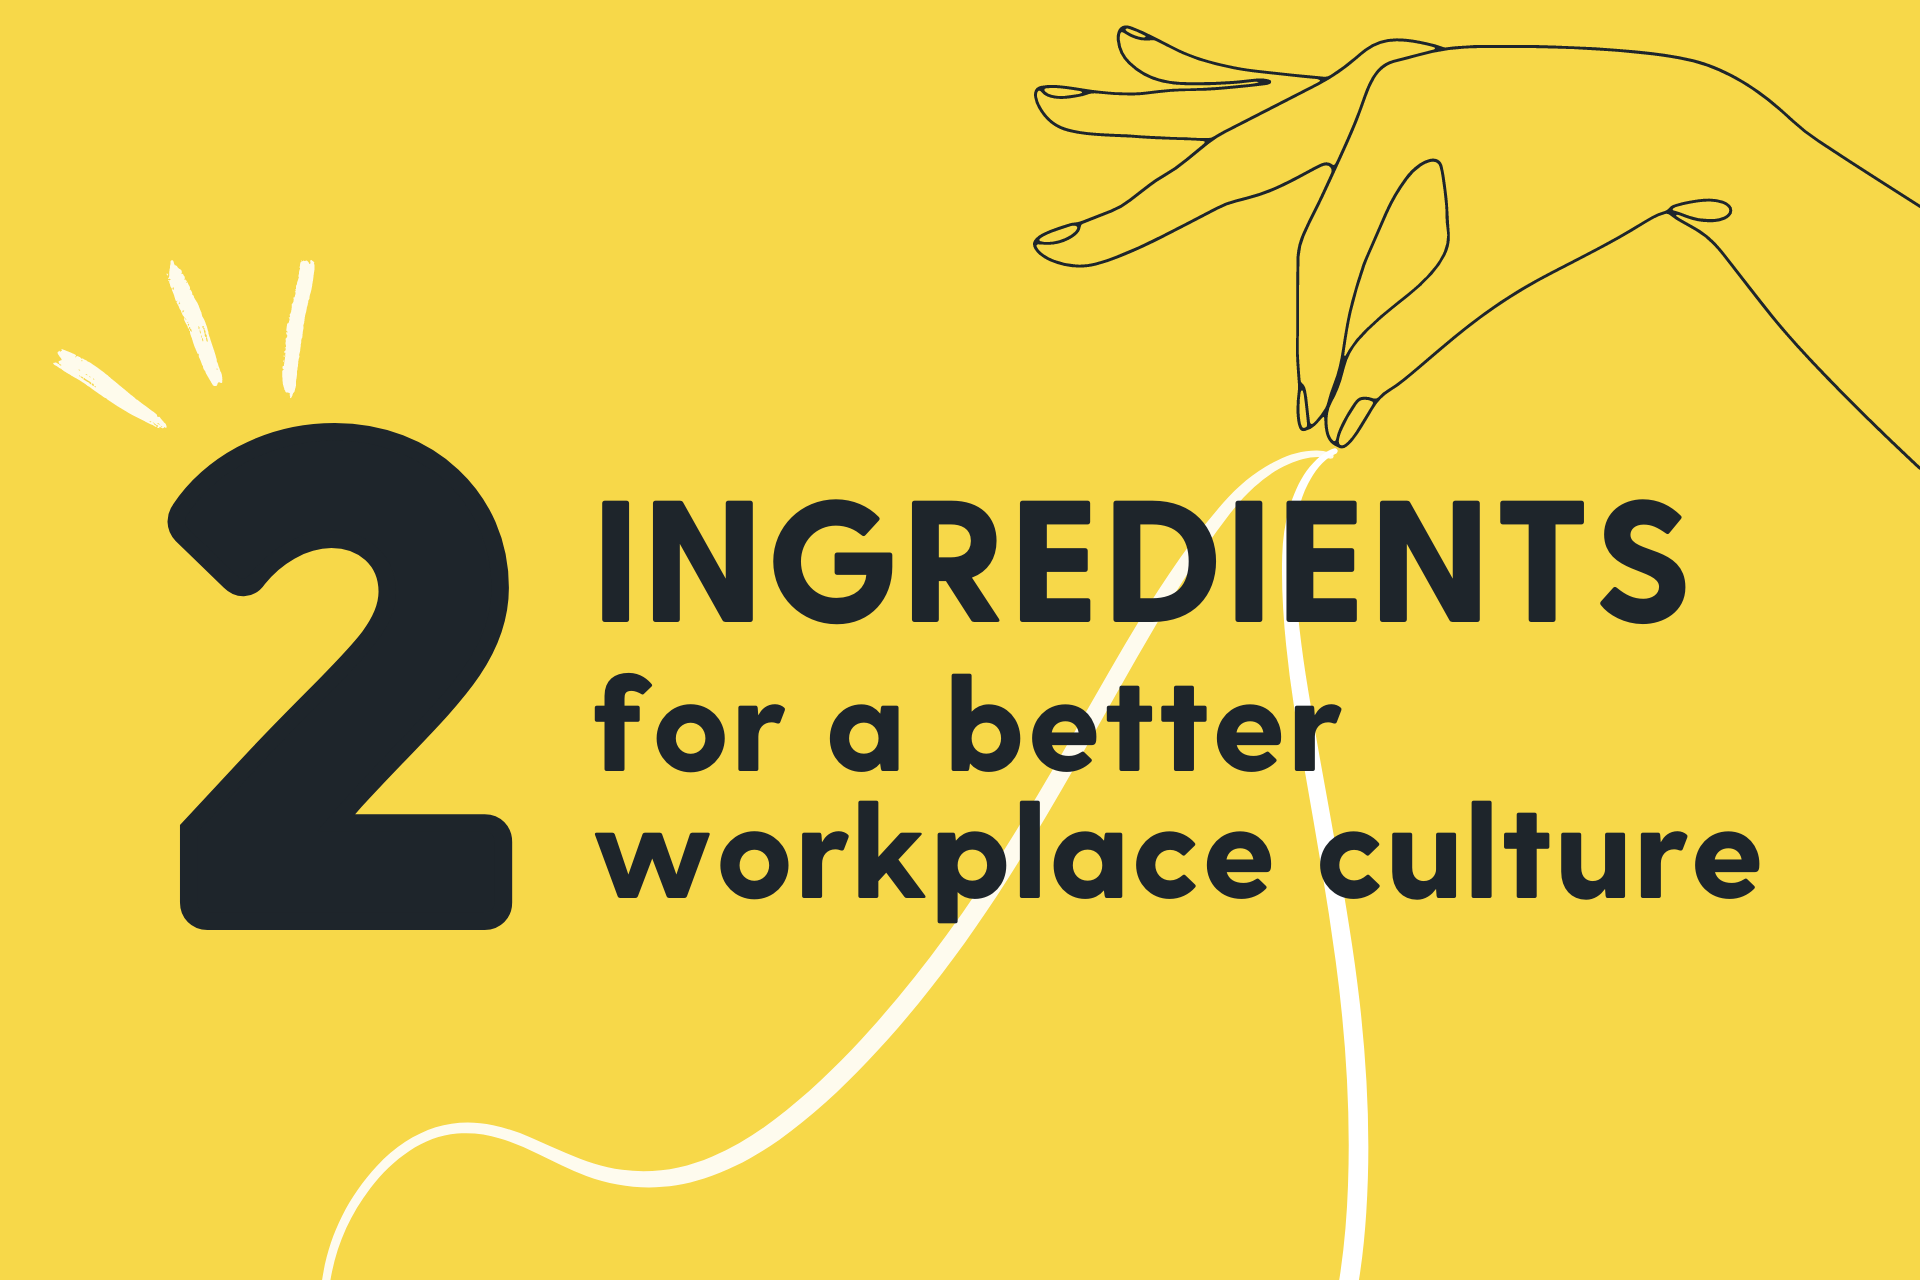 Two ingredients for better workplace culture